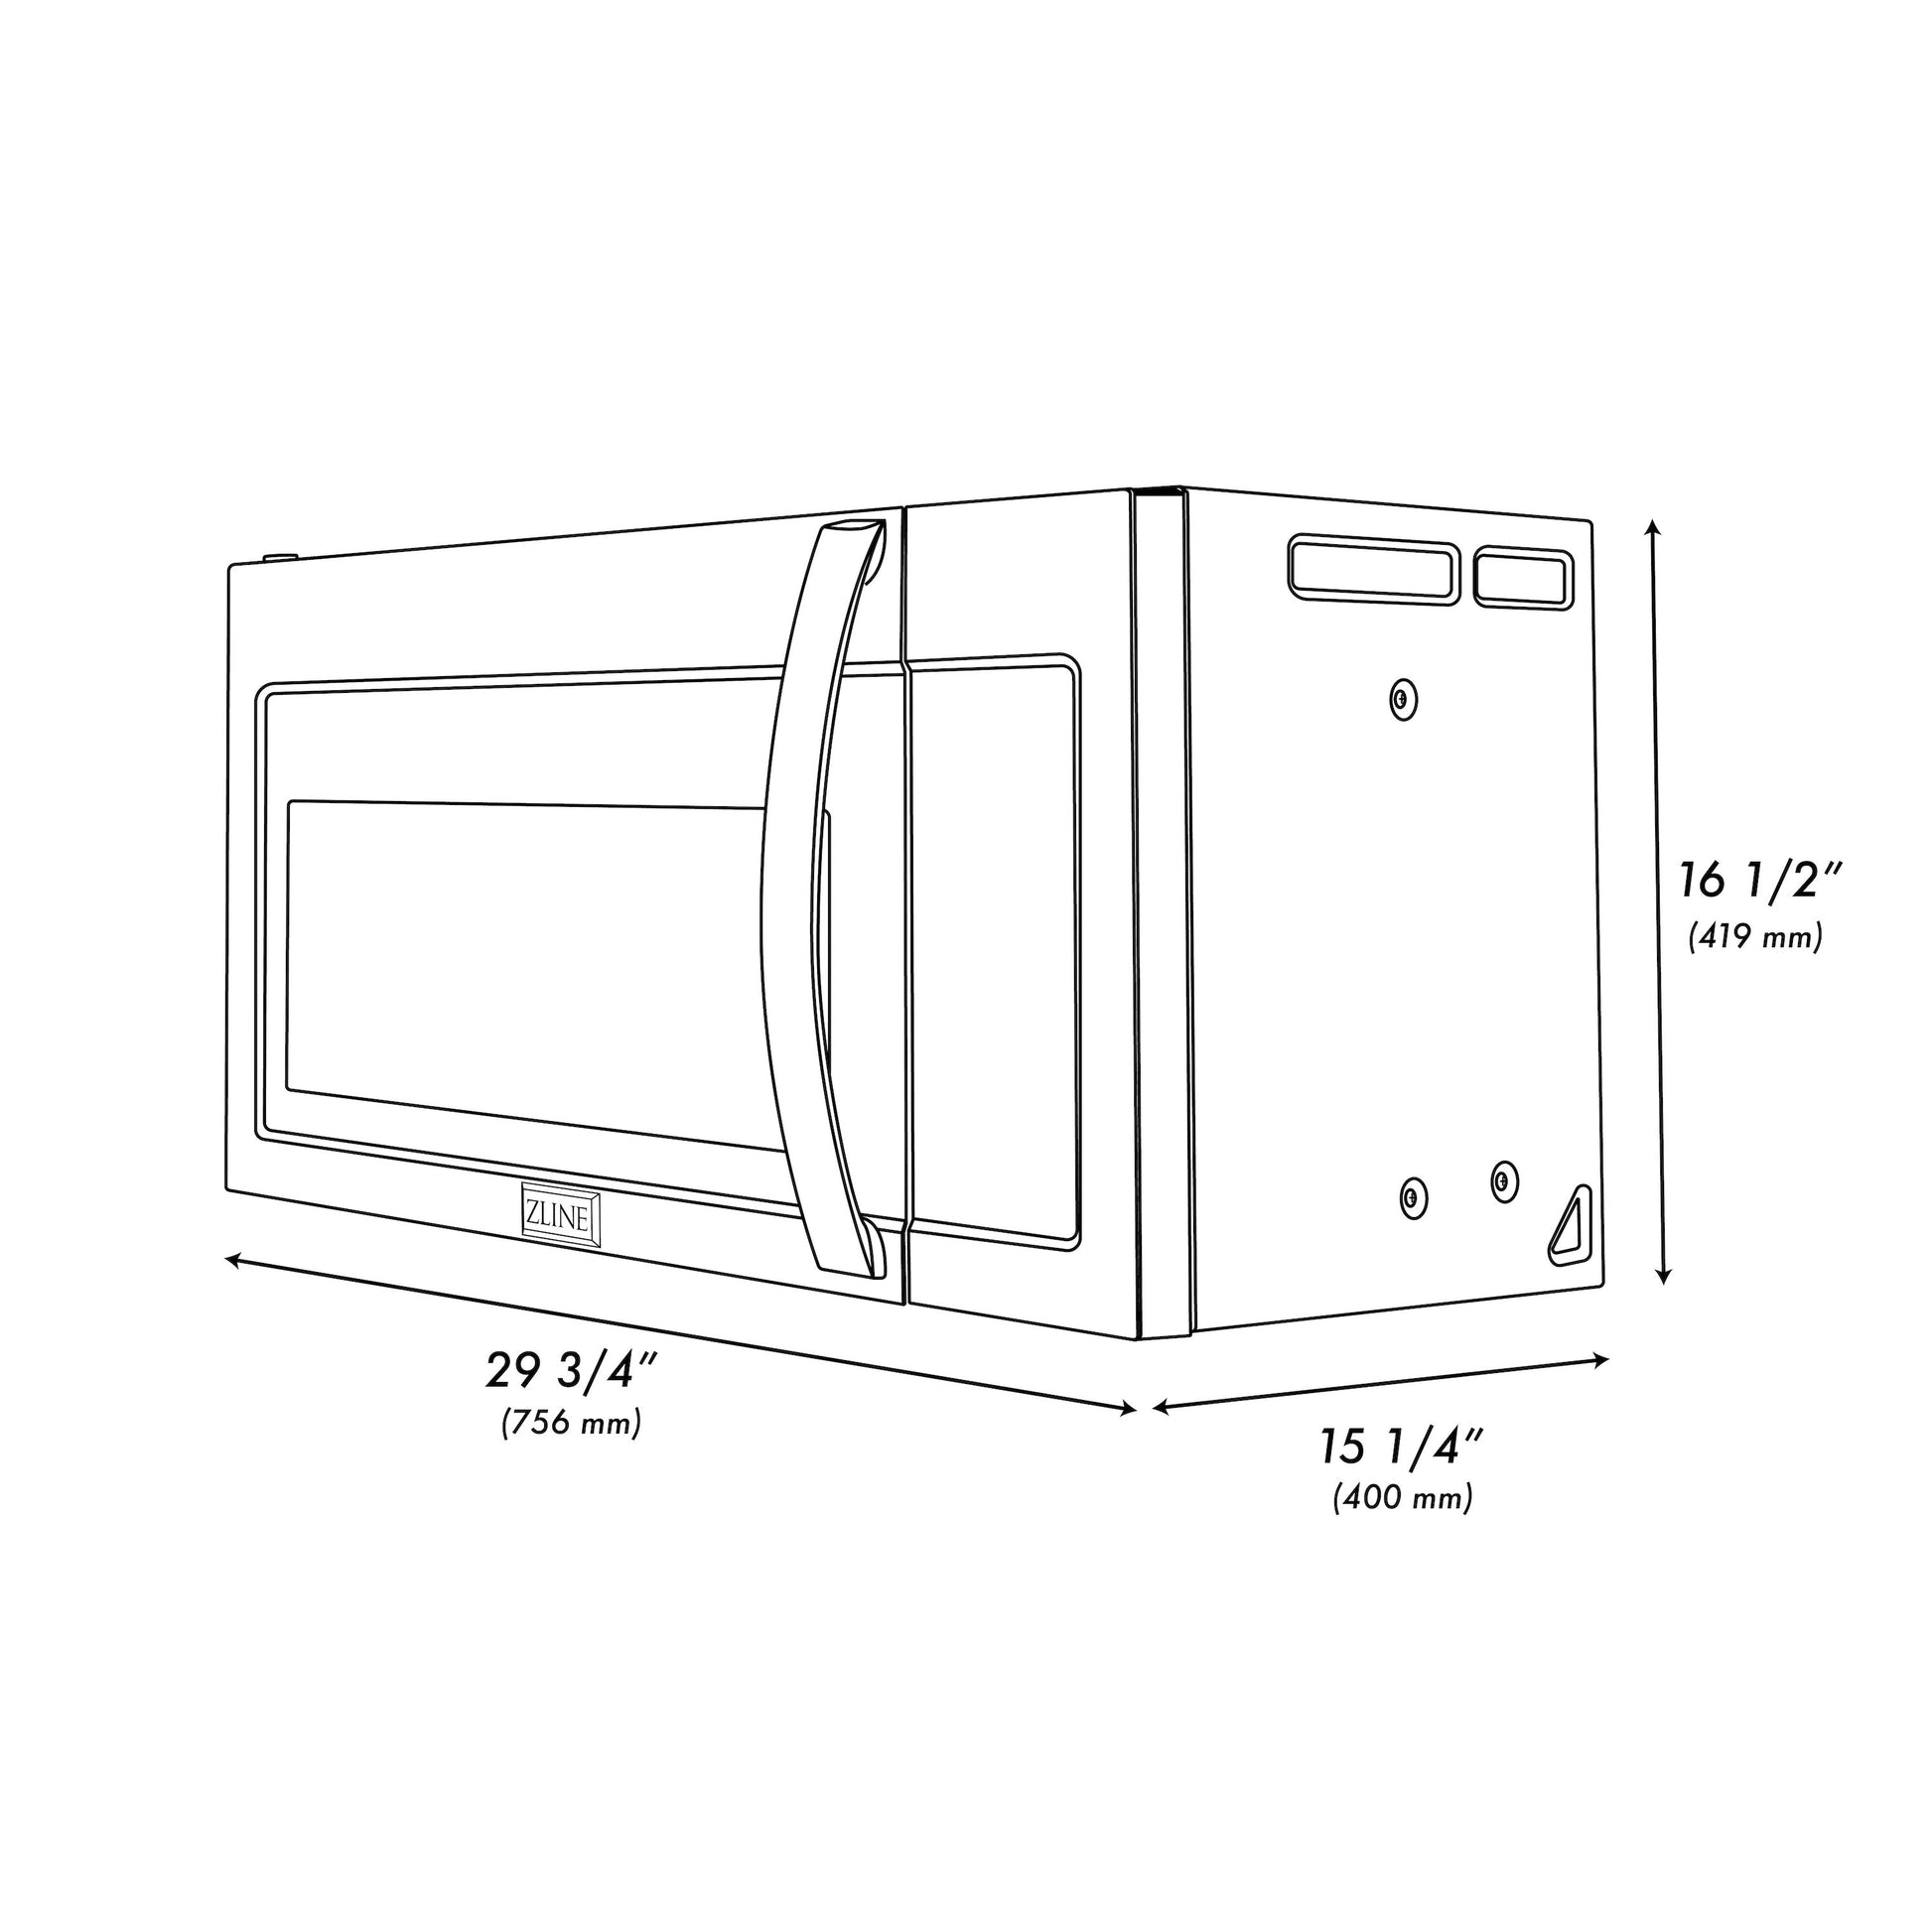 ZLINE Black Stainless Steel Over the Range Convection Microwave Oven with Modern Handle (MWO-OTR-30-BS) dimensional diagram with measurements.